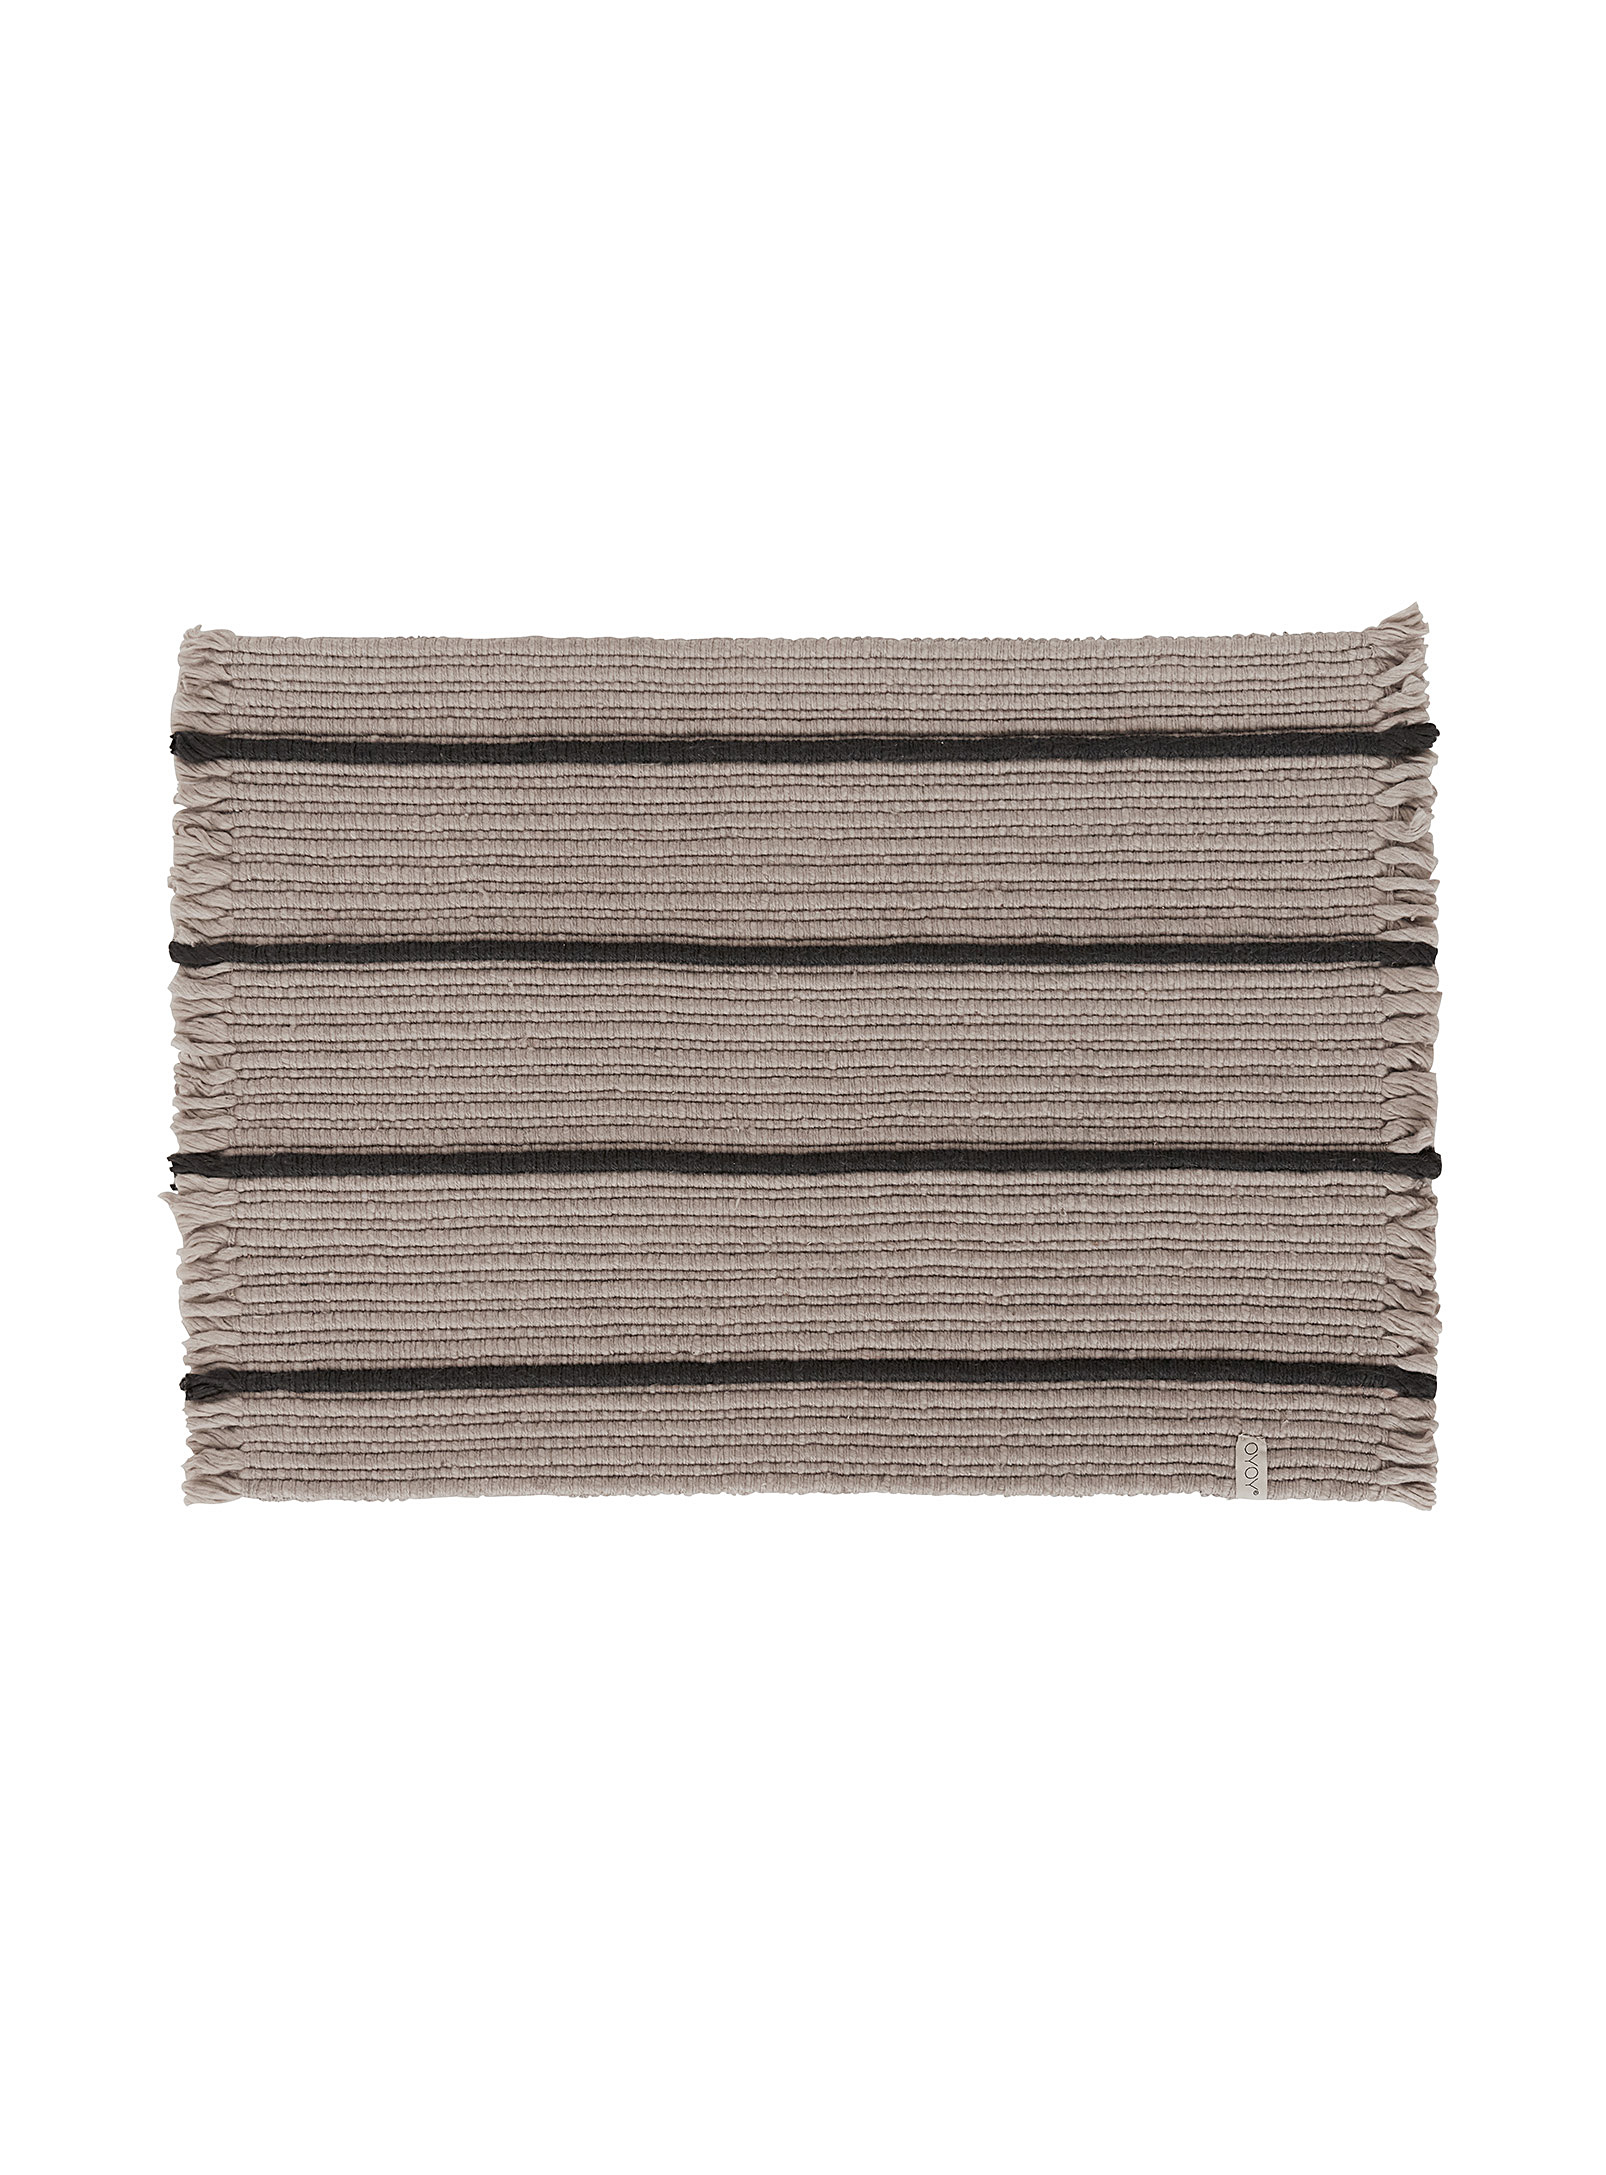 Oyoy Living Design Contrasting Stripes Textured Rug 52 X 76 Cm In Black And White